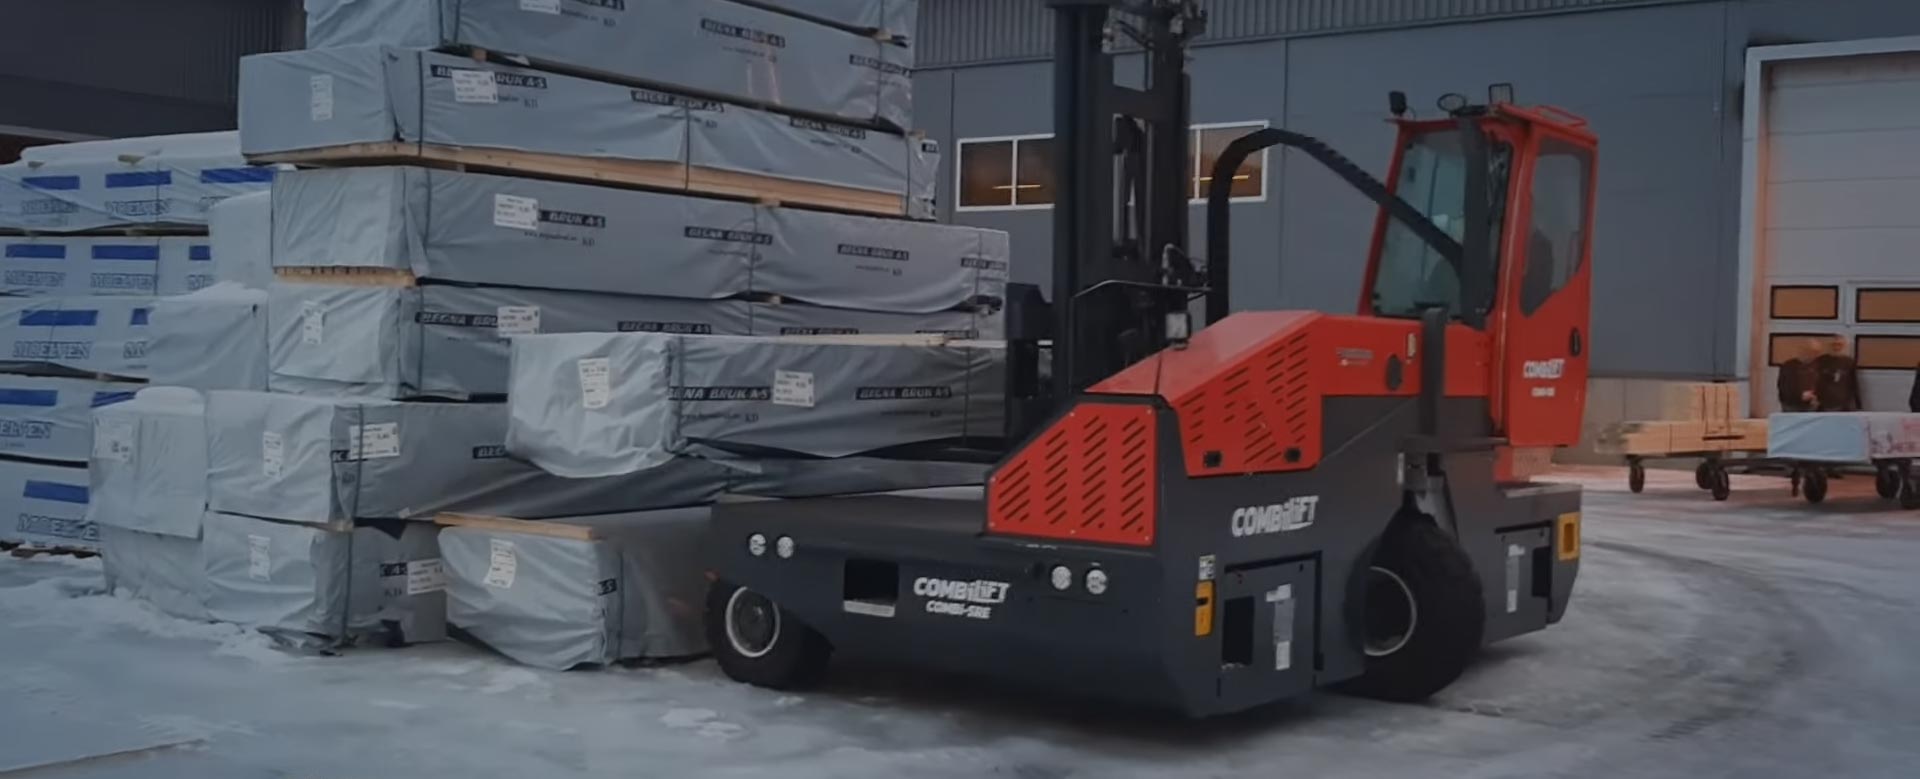 Combi SL 4500 Multi-directional Forklift with 4040mm lifting Height